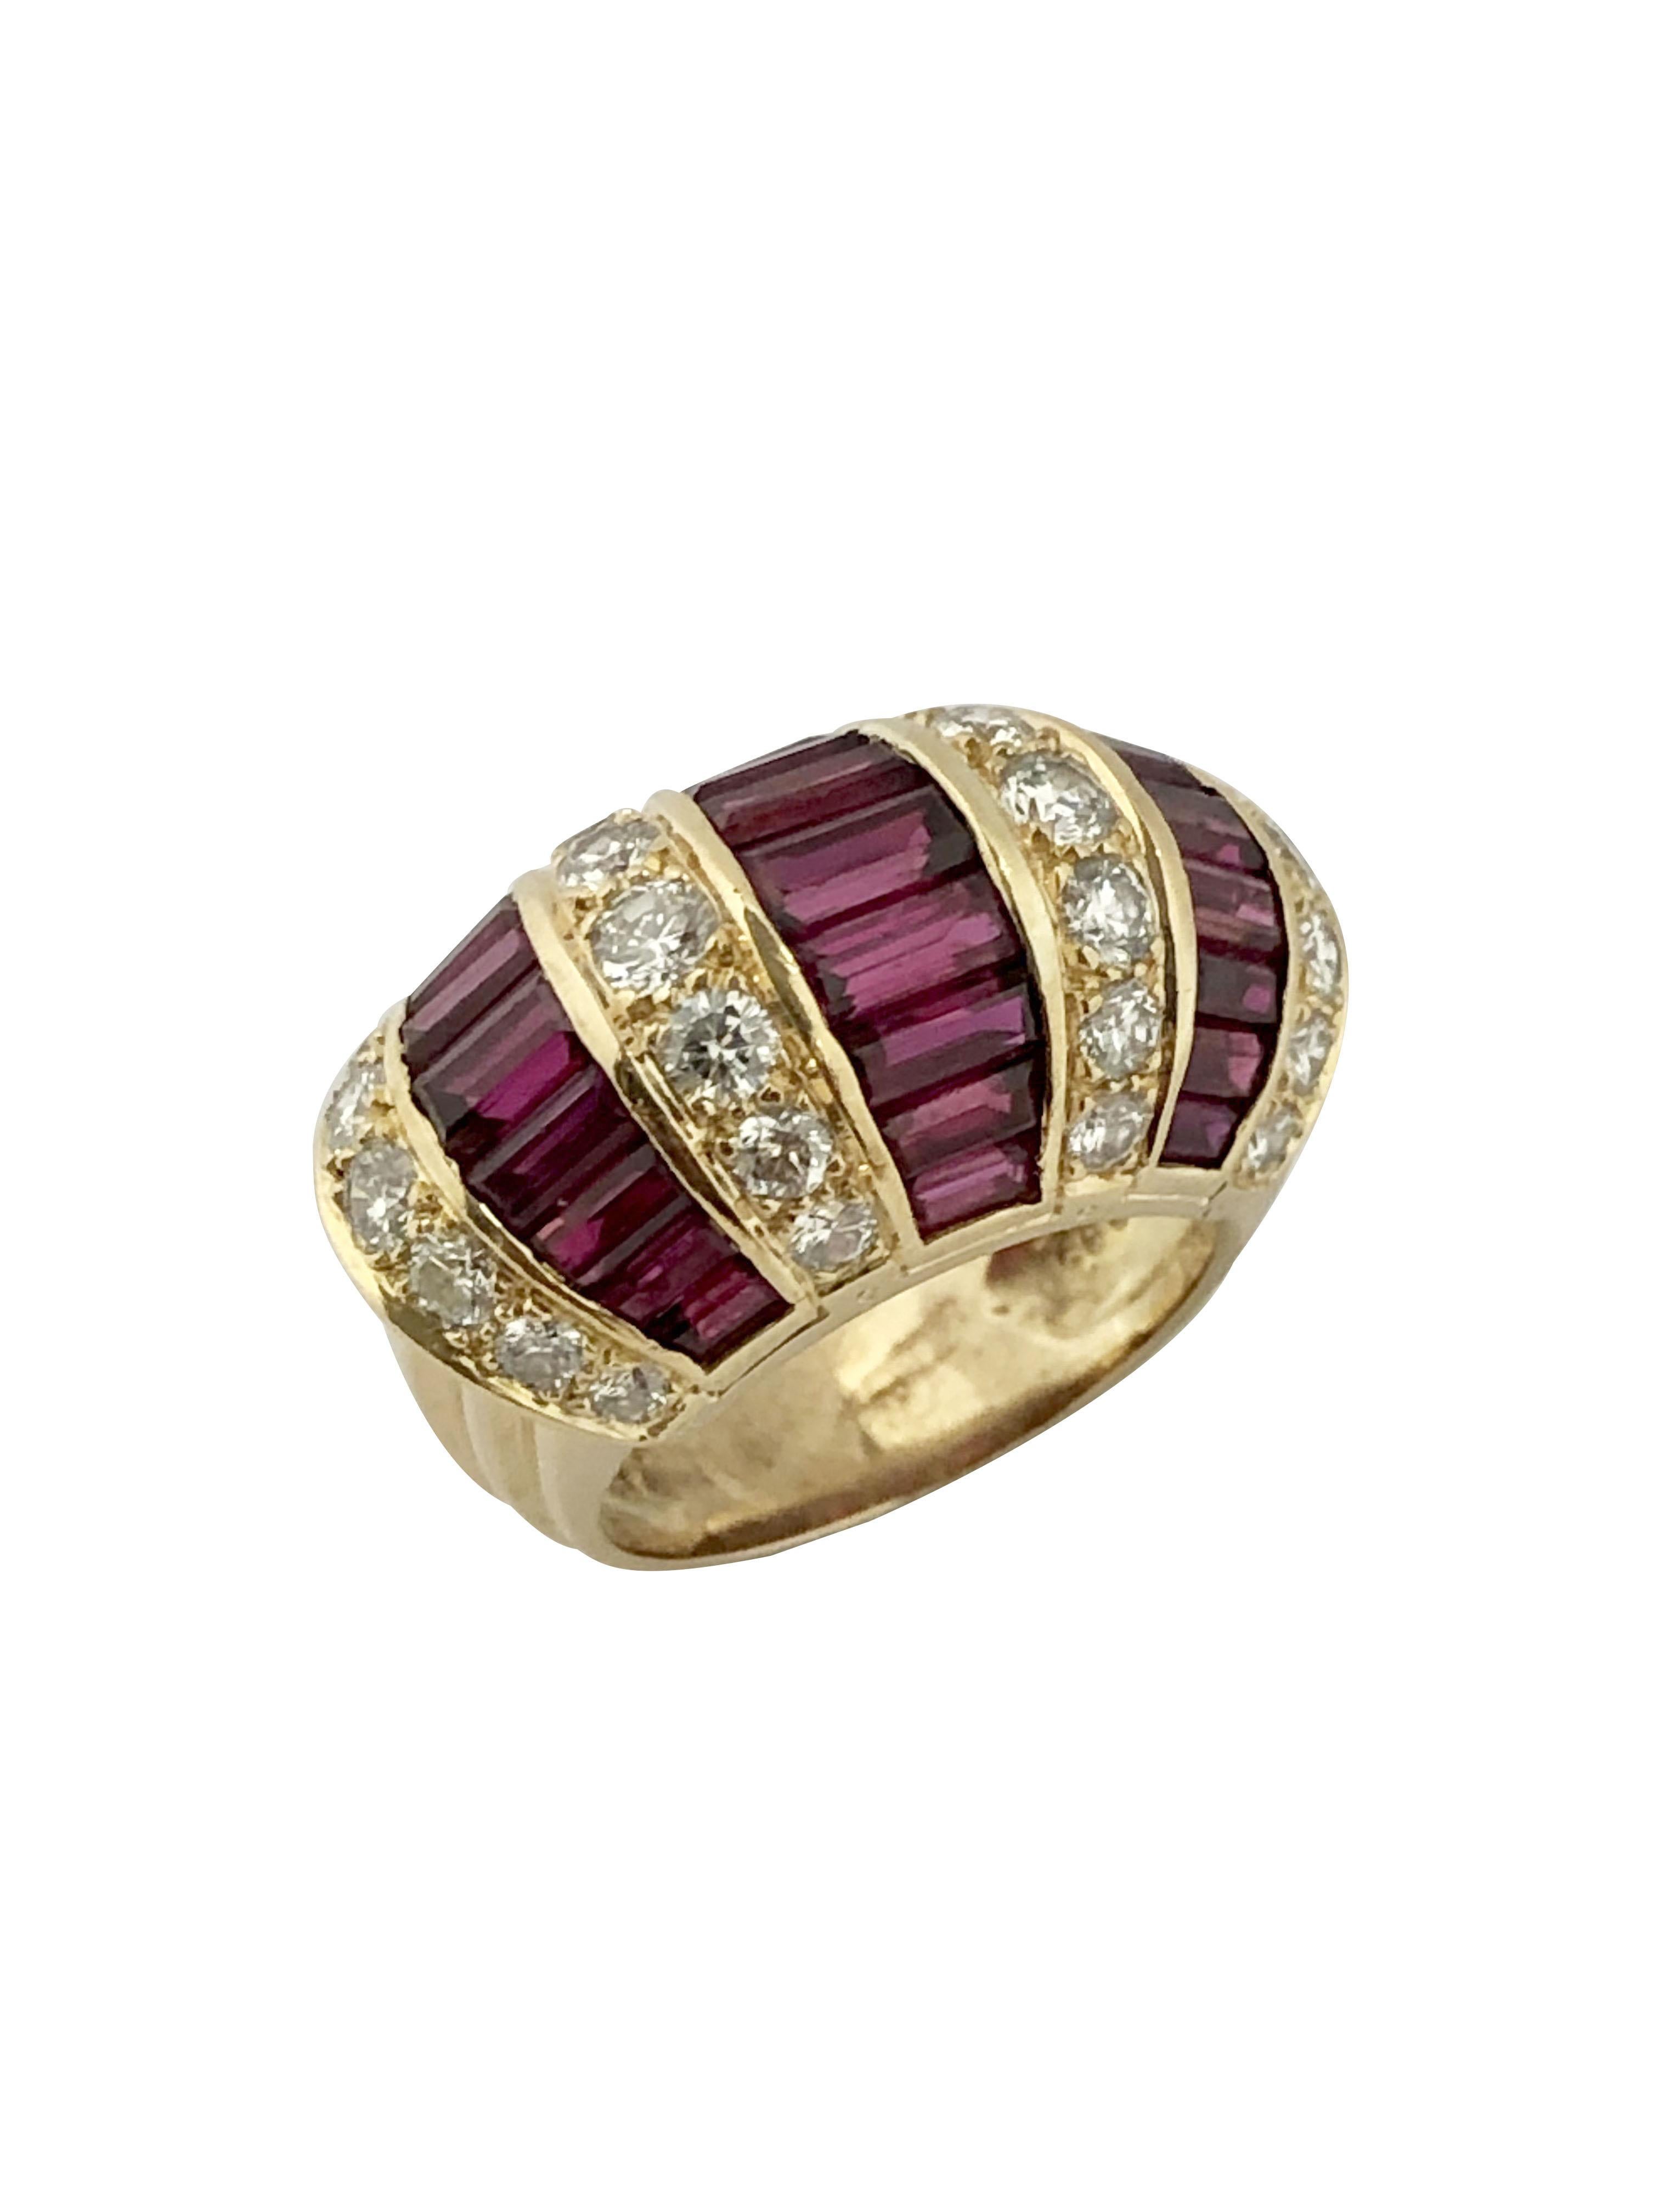 Baguette Cut Oscar Heyman Large Yellow Gold Ruby and Diamond Cocktail Ring For Sale